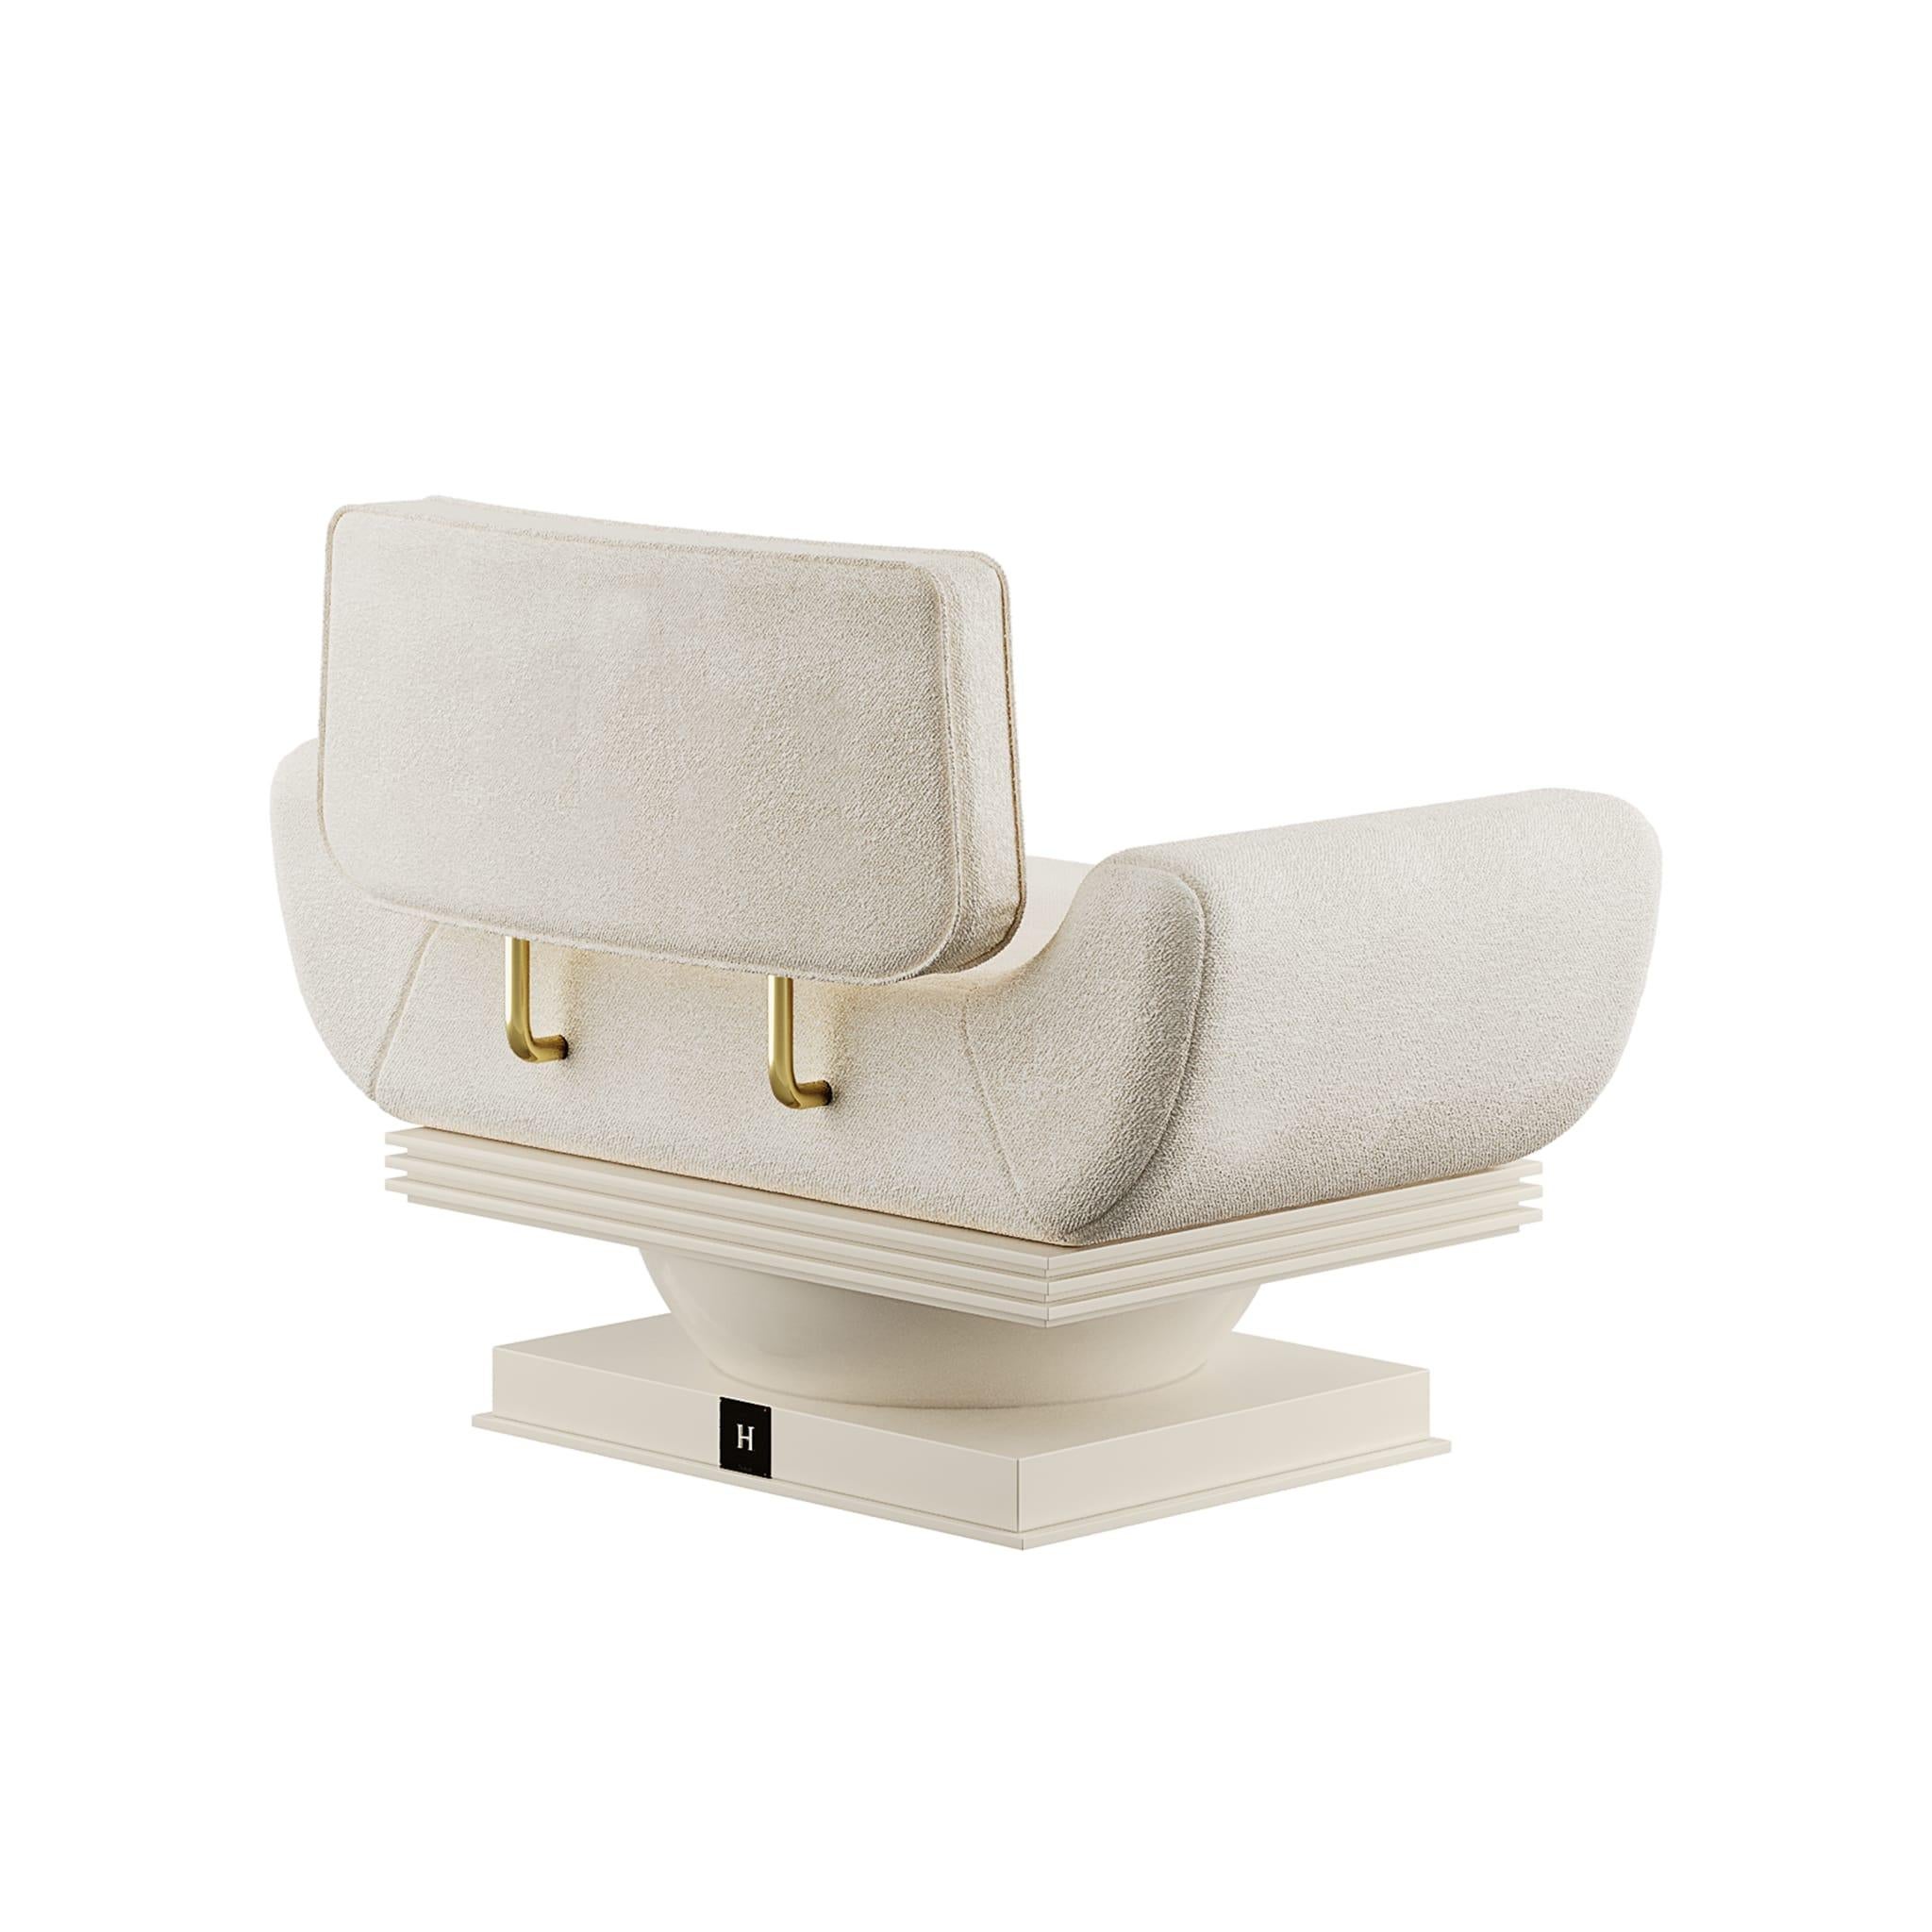 Portuguese Modern Cream Armchair Bouclé Lacquered in Gloss With Brass Details For Sale